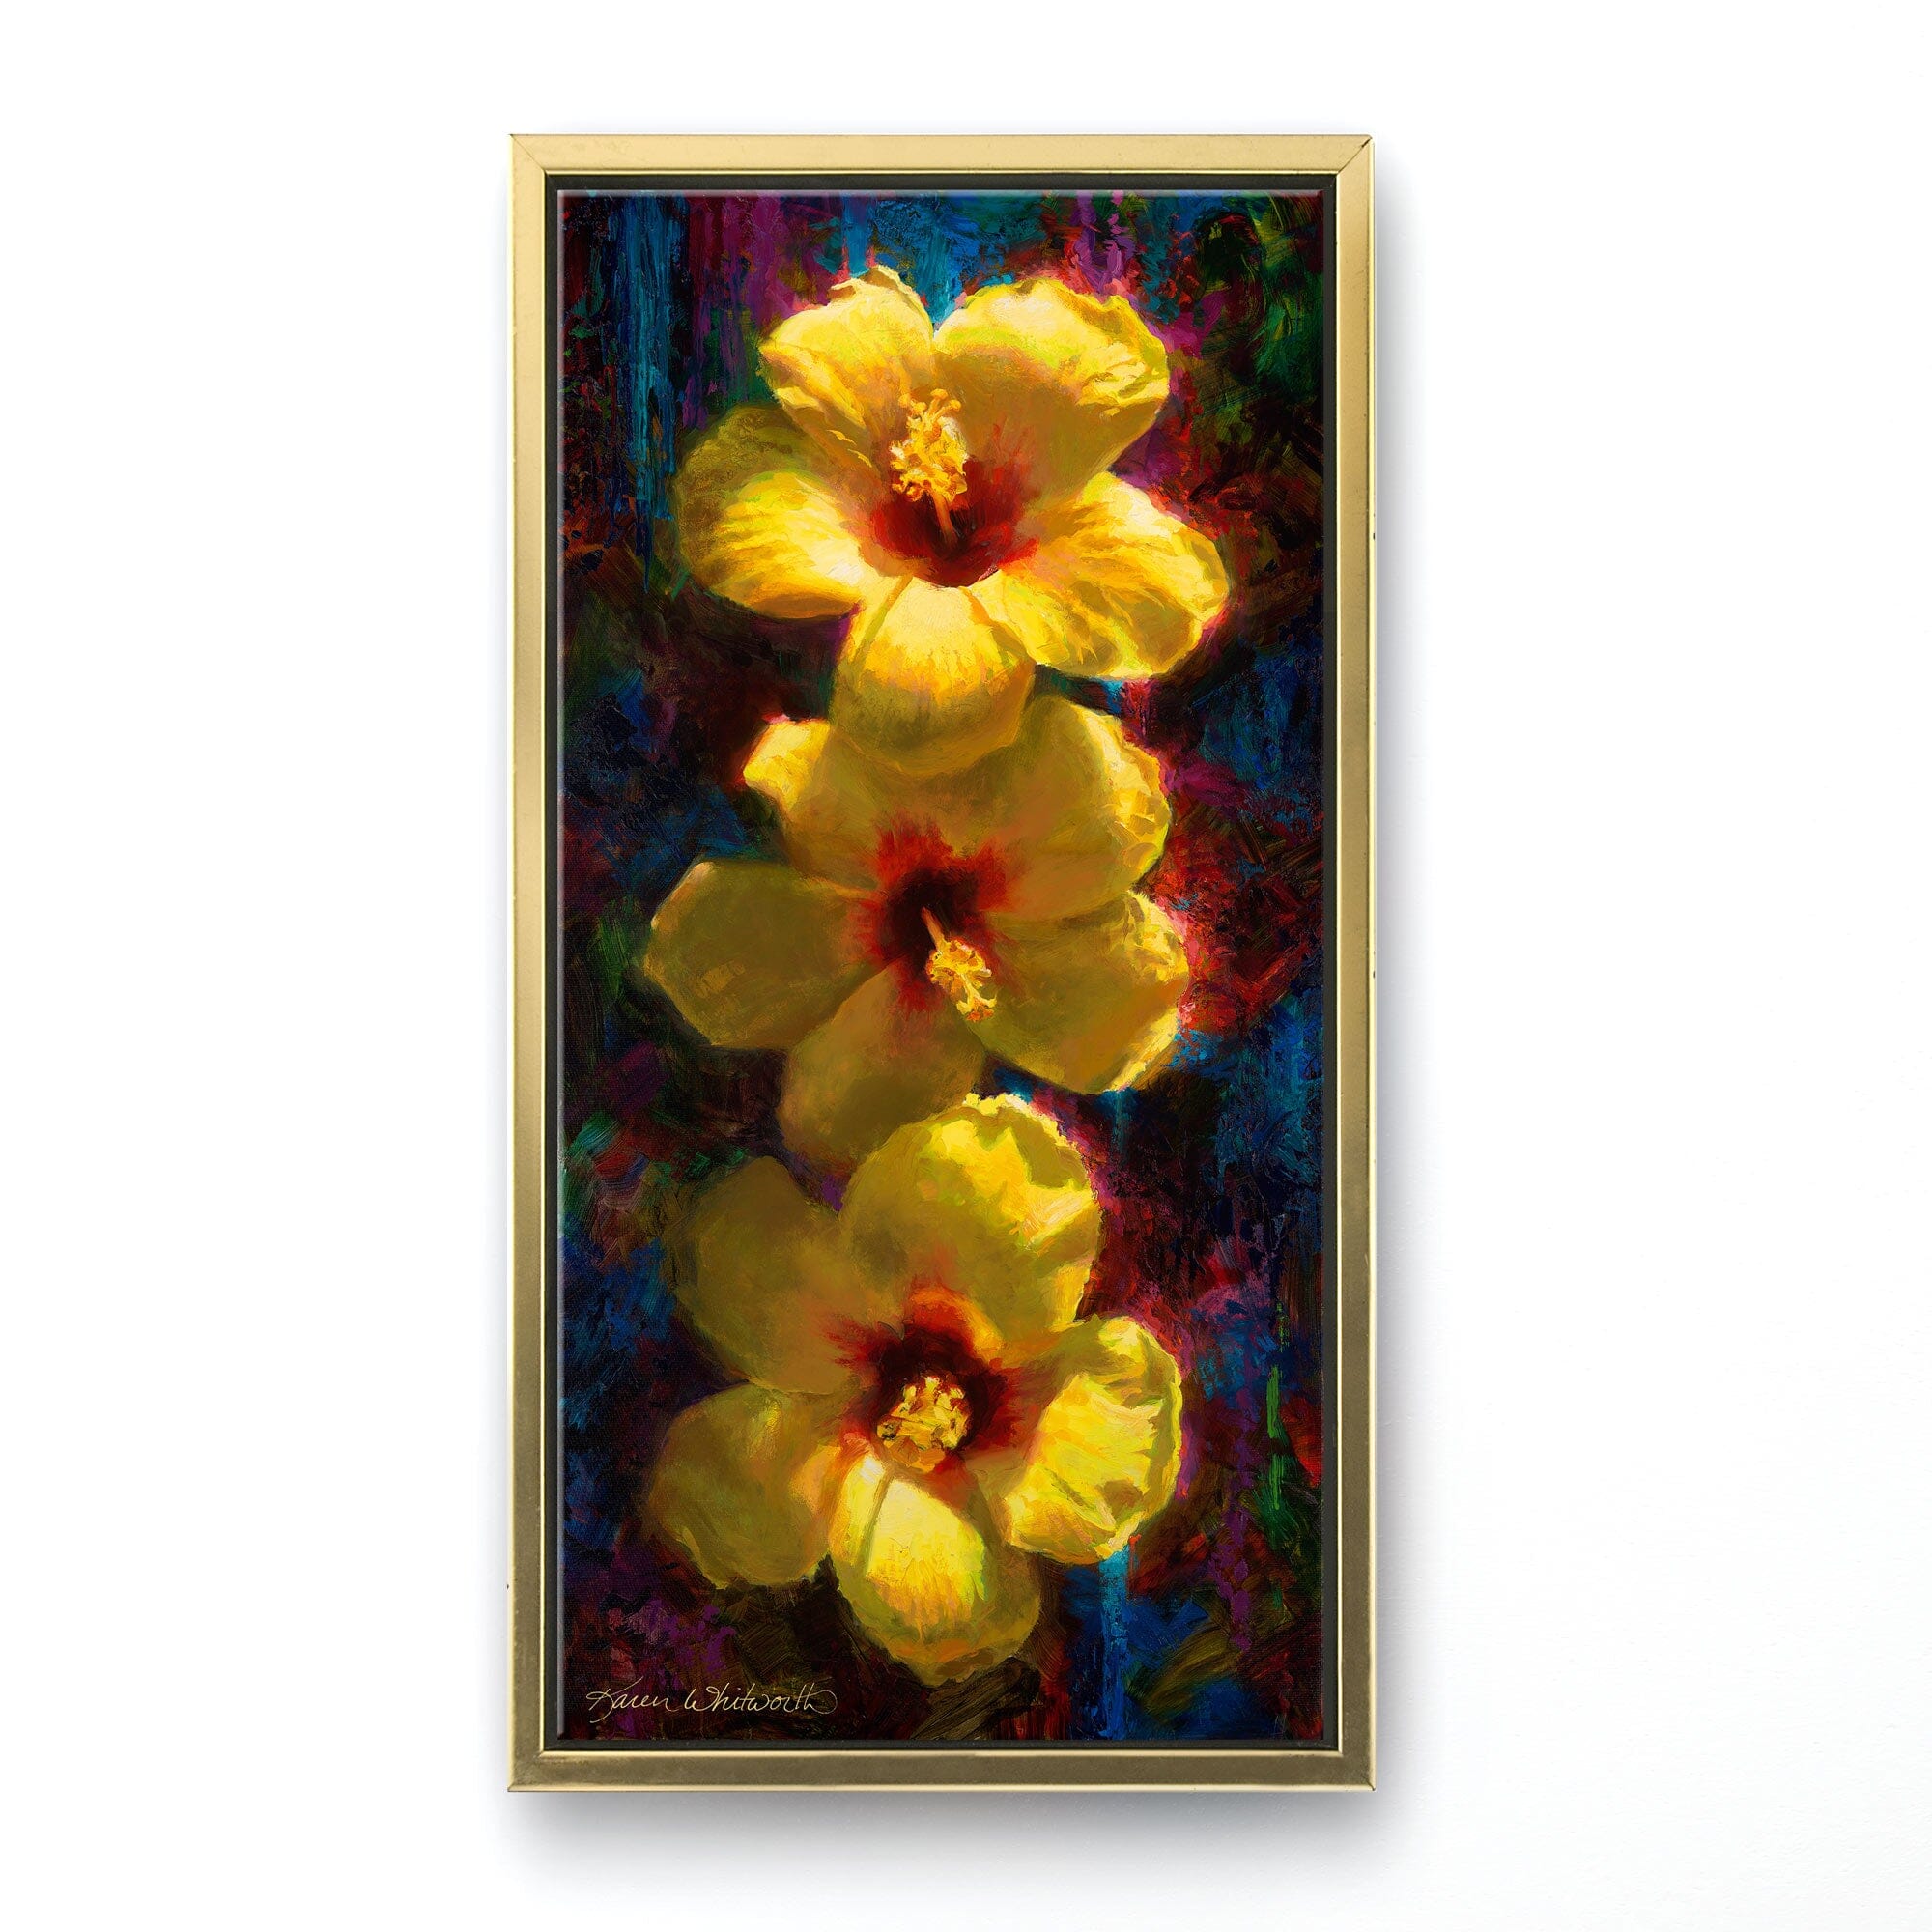 Vertical floral painting of tropical hibiscus flowers by artist Karen Whitworth. The 3 bright yellow flowers sit one on top of the other illuminated in sunlight against a dark background. The painting is framed in a sleek gold contemporary frame and hanging on a white wall. 